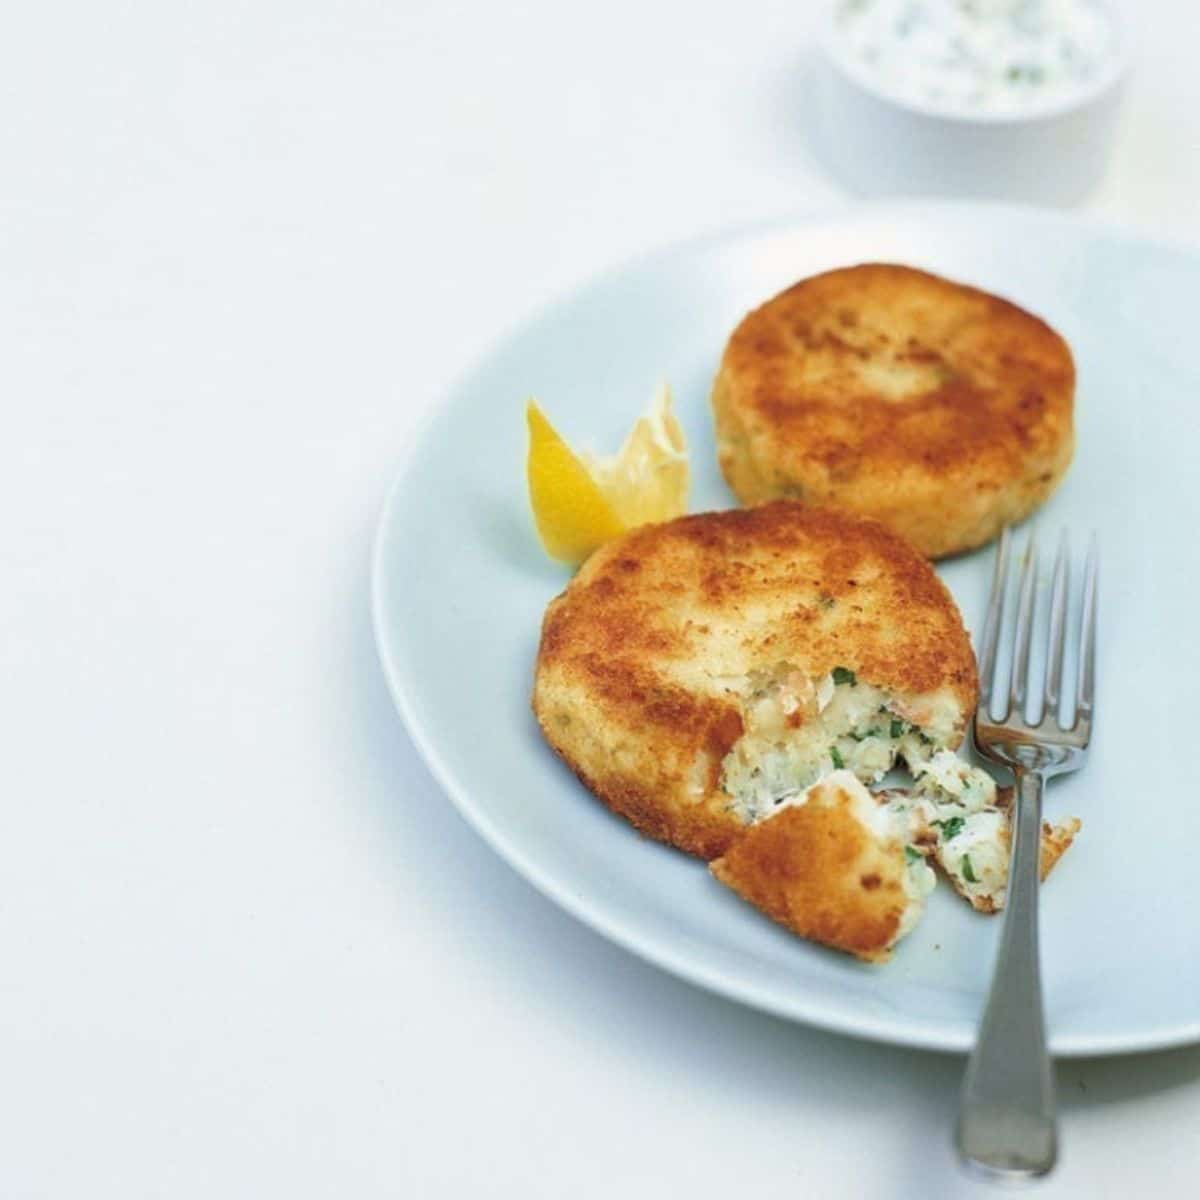 fish cakes on light blue saucer with fork on white table